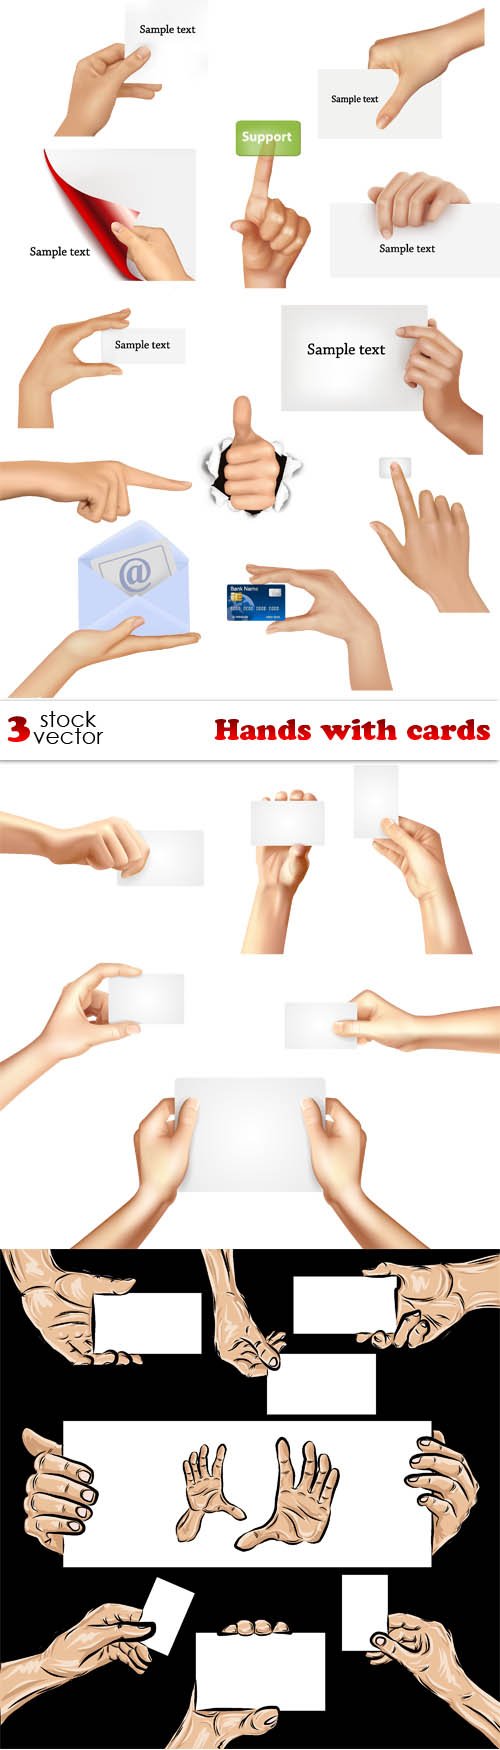 Vectors - Hands with cards